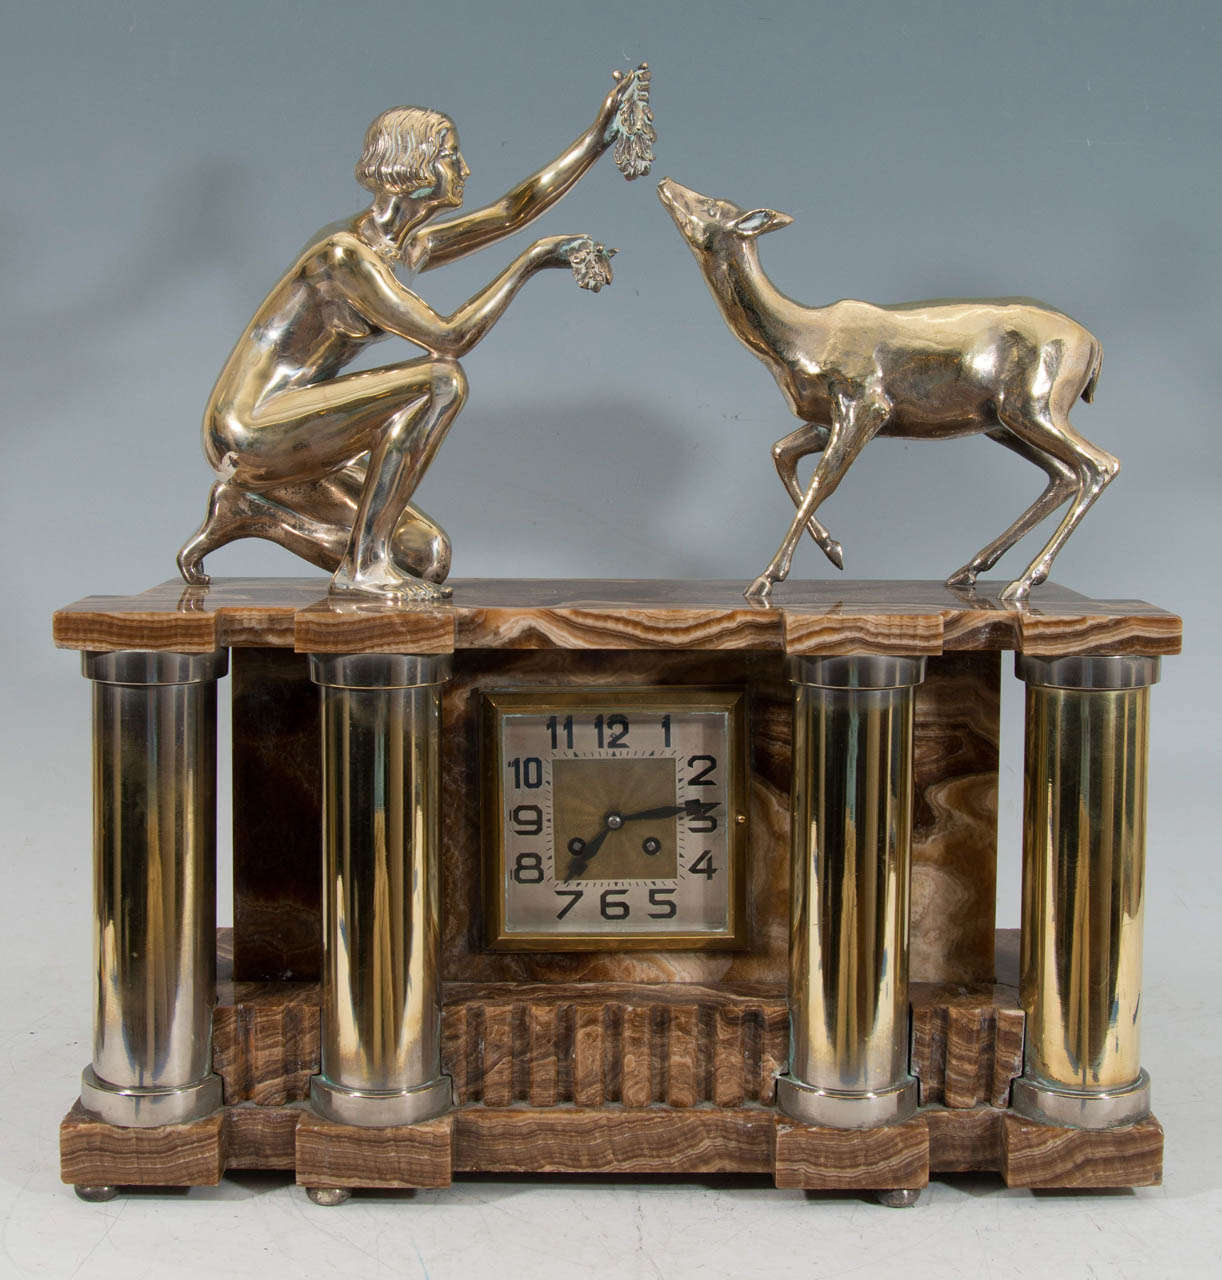 Amazing Glorious Heavy French Art Deco silvered bronze and onyx clock decorated with four columns and a Nude Diana feeding a Deer.Slight wear to silvered bronze.An Great Clock for a Console Table with two  High End candlesticks beside it.

